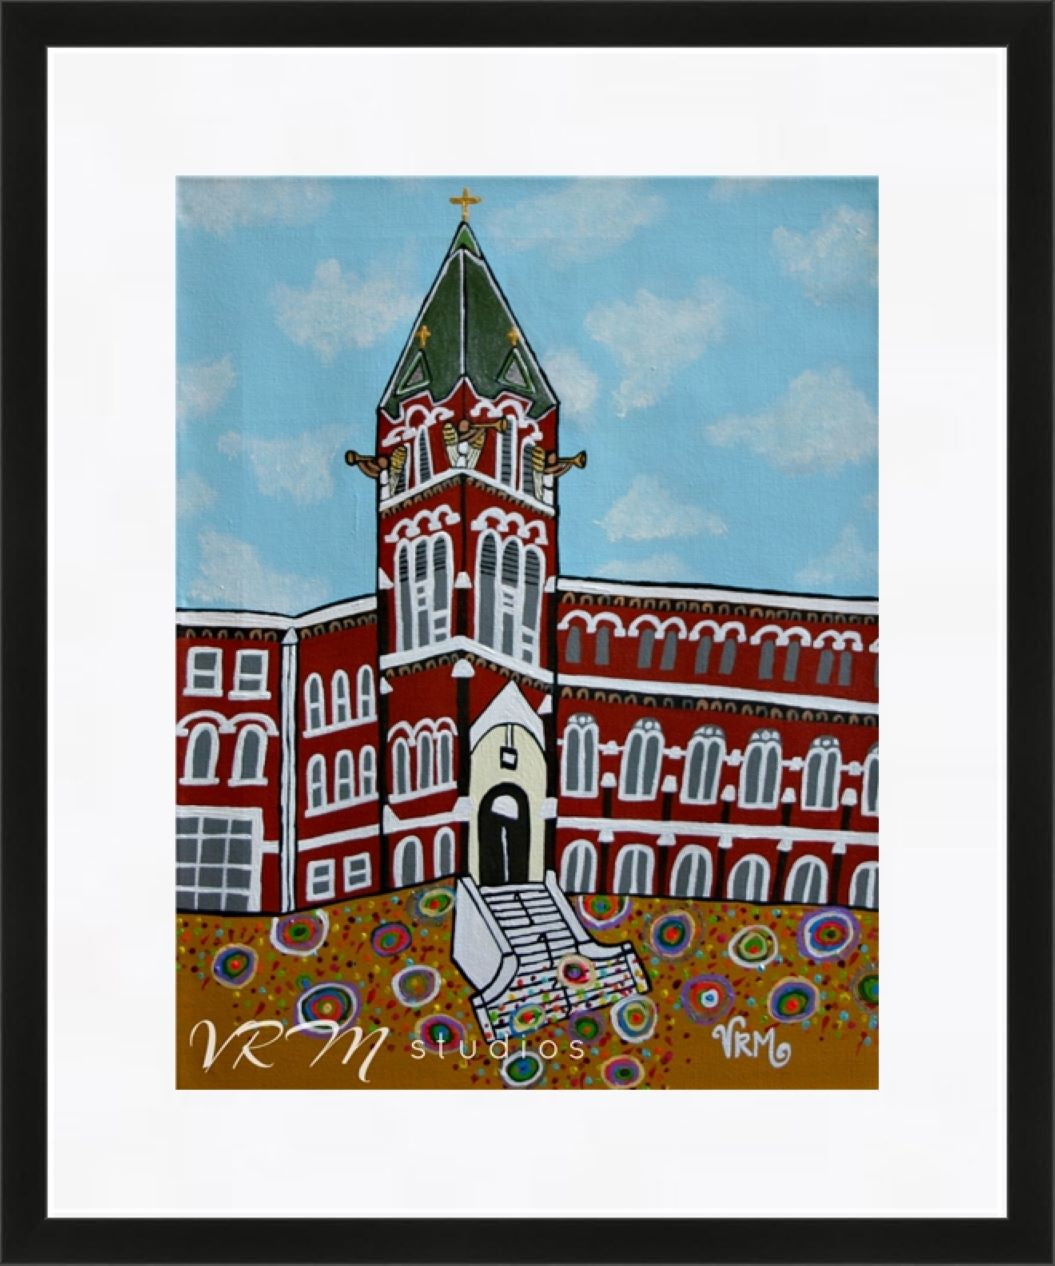 Goin' To The Incarnate Word Chapel, folk art print on quality acid free photo paper, unmatted or matted